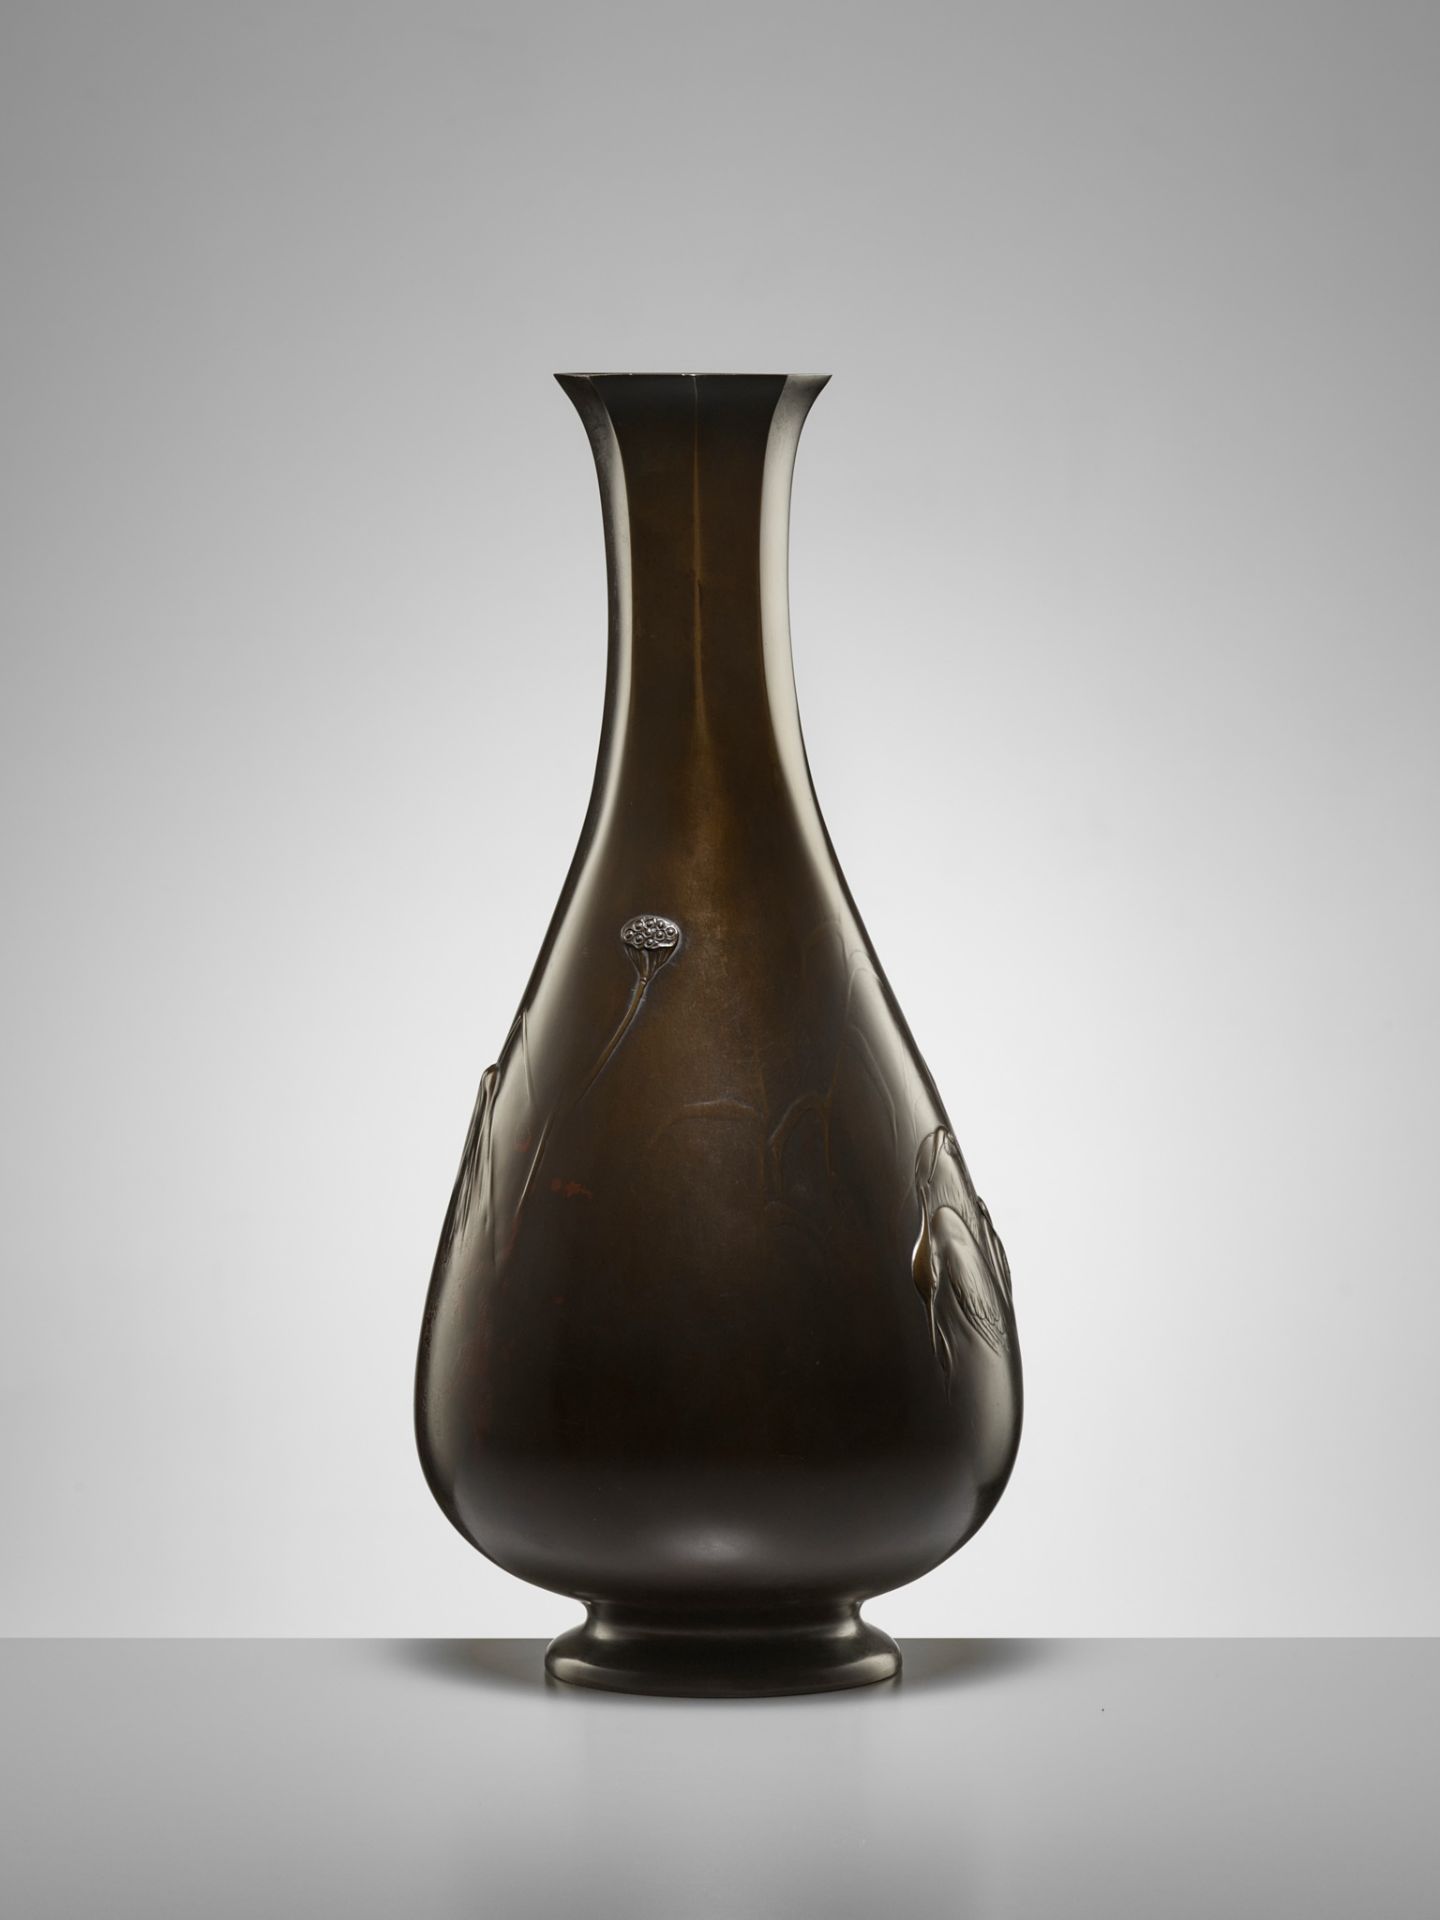 HIDEMITSU: A SUPERB AND LARGE BRONZE VASE DEPICTING HERONS AND LOTUS - Image 5 of 10